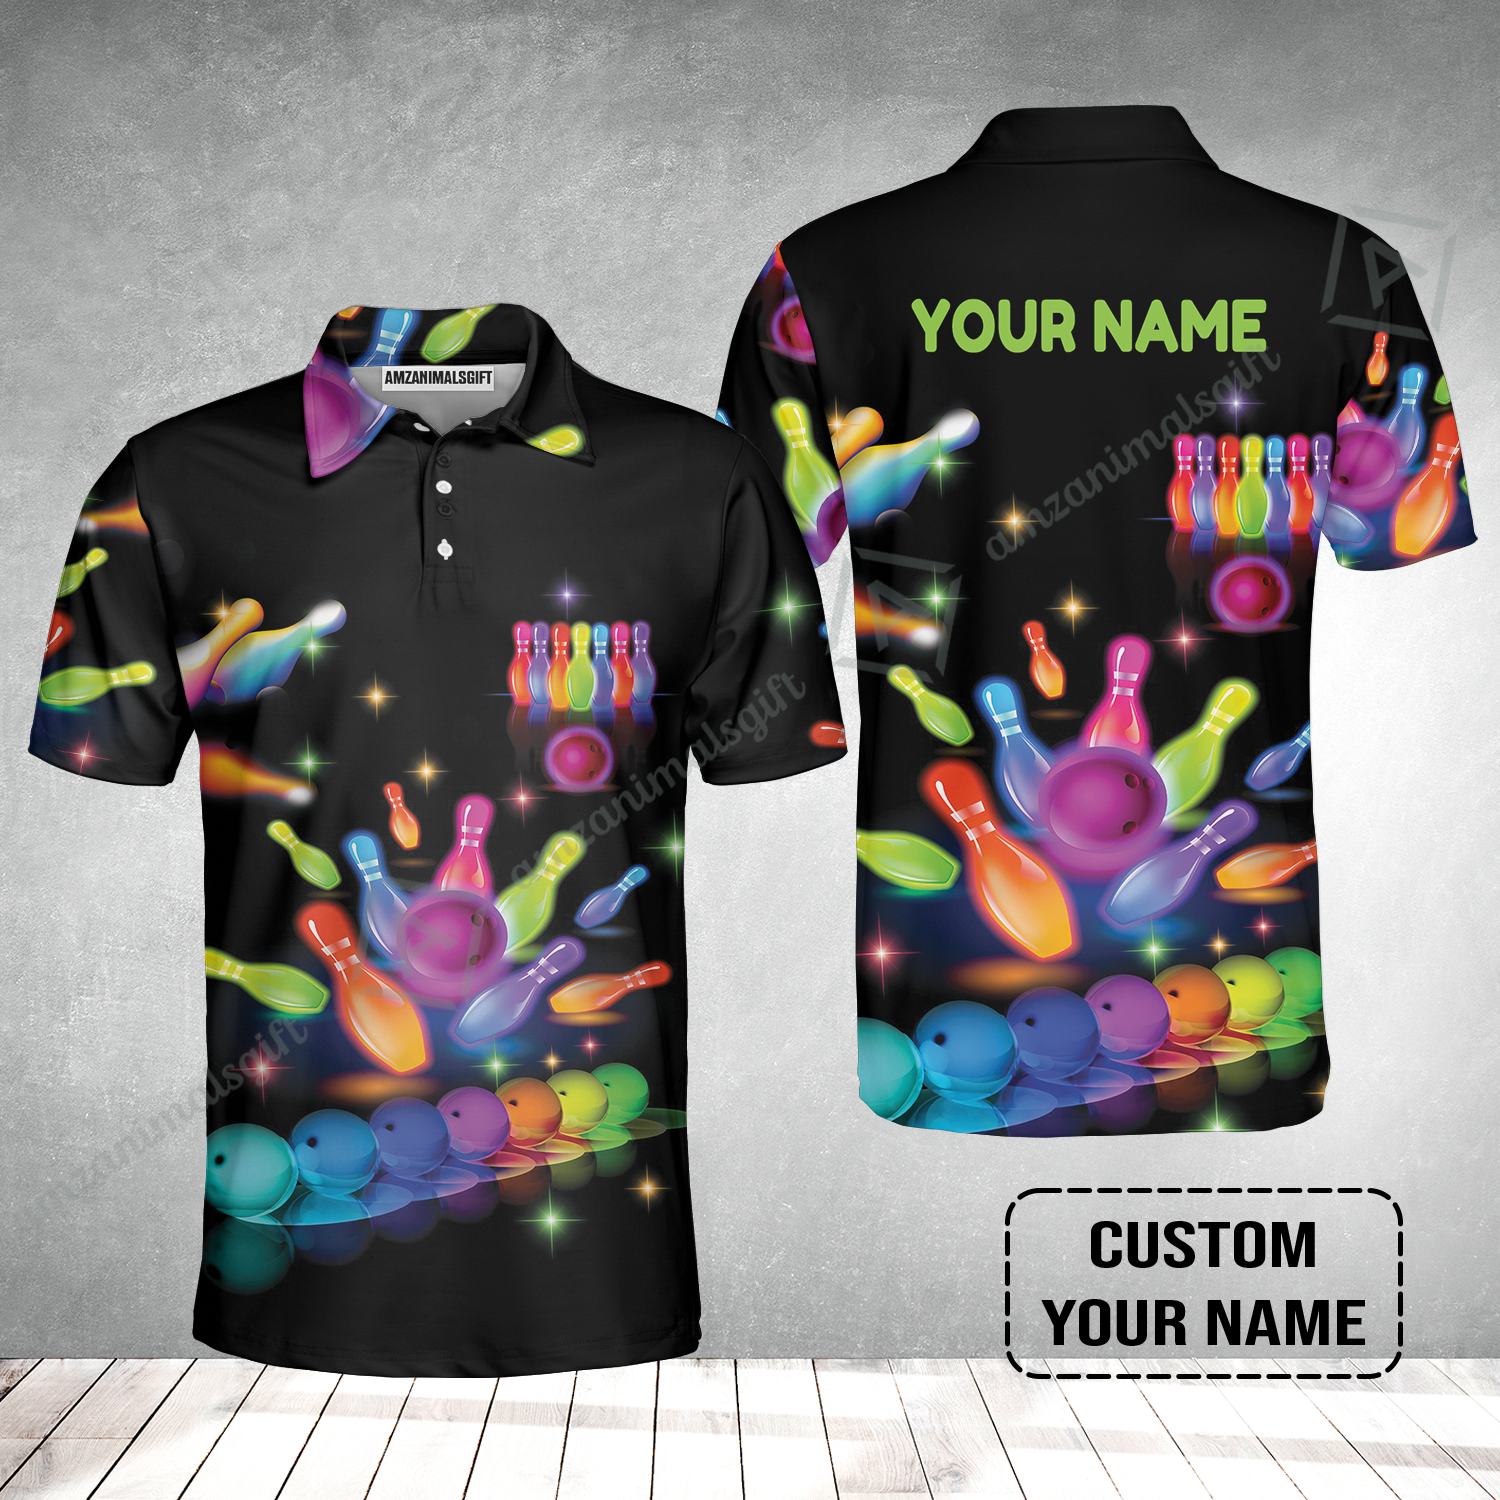 Bowling Polo Shirt Customized Name, Colorful Bowling Pattern Polo Shirt For Men And Women, Perfect Outfits For Bowling Lovers, Bowlers